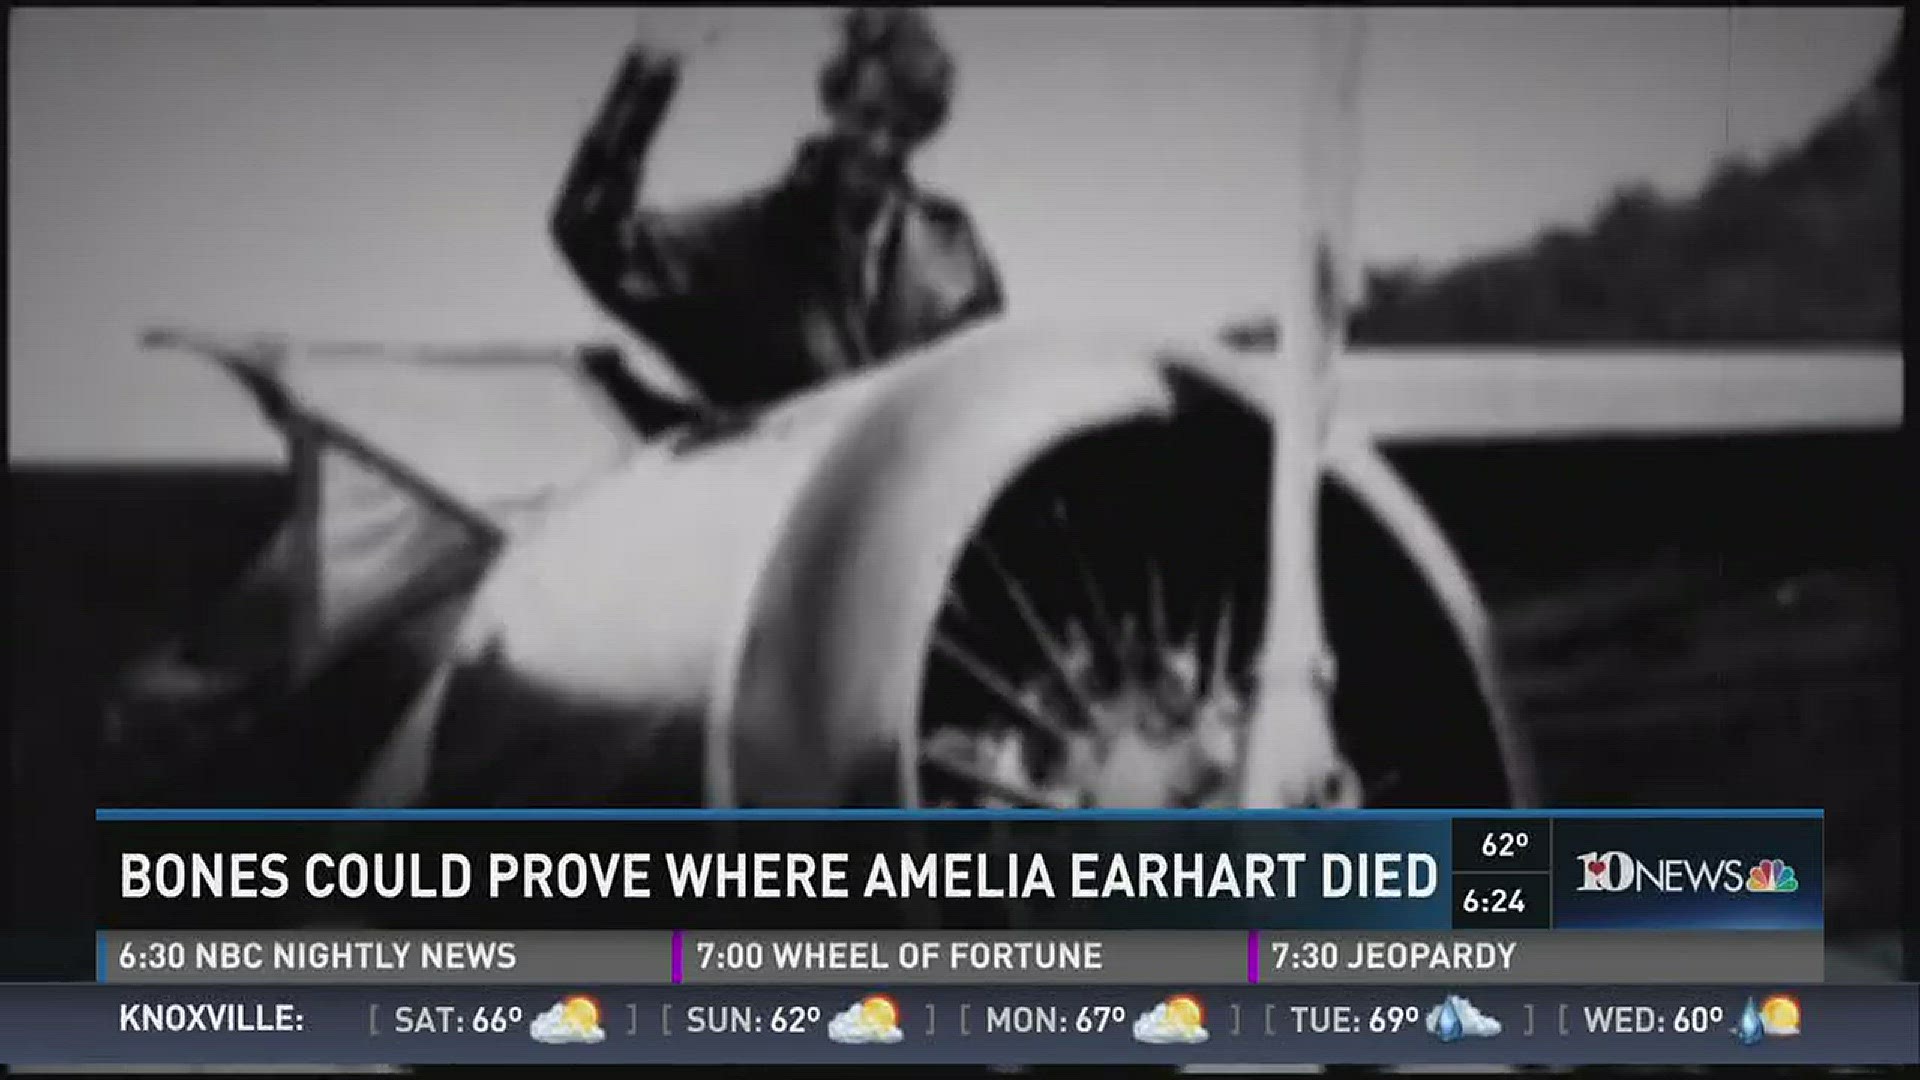 It's one of the greatest aviation mysteries of all time. Today, researchers are still trying to find out what happened to Amelia Earhart, the first woman to fly solo across the Atlantic.